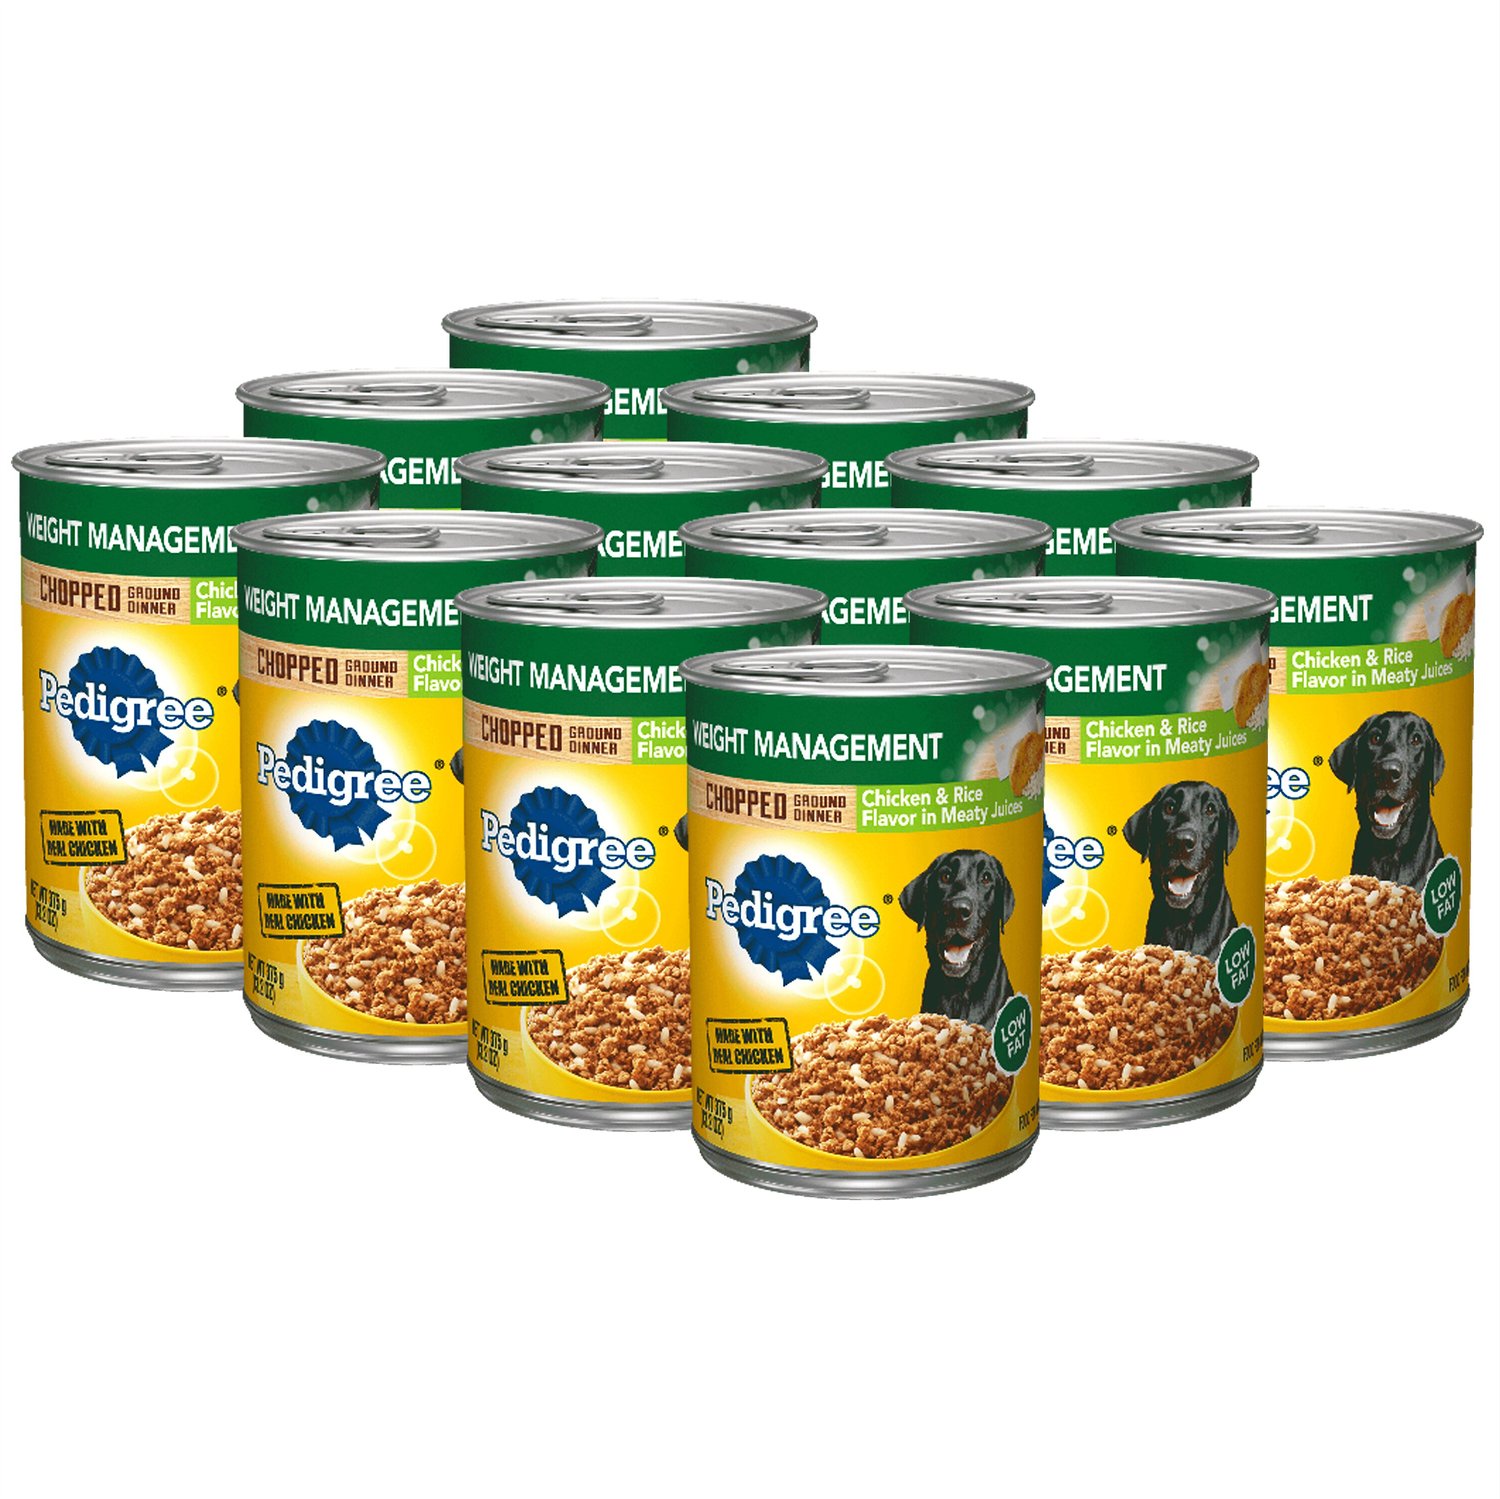 Pedigree Chopped Ground Dinner Weight Management Chicken & Rice Canned Dog Food